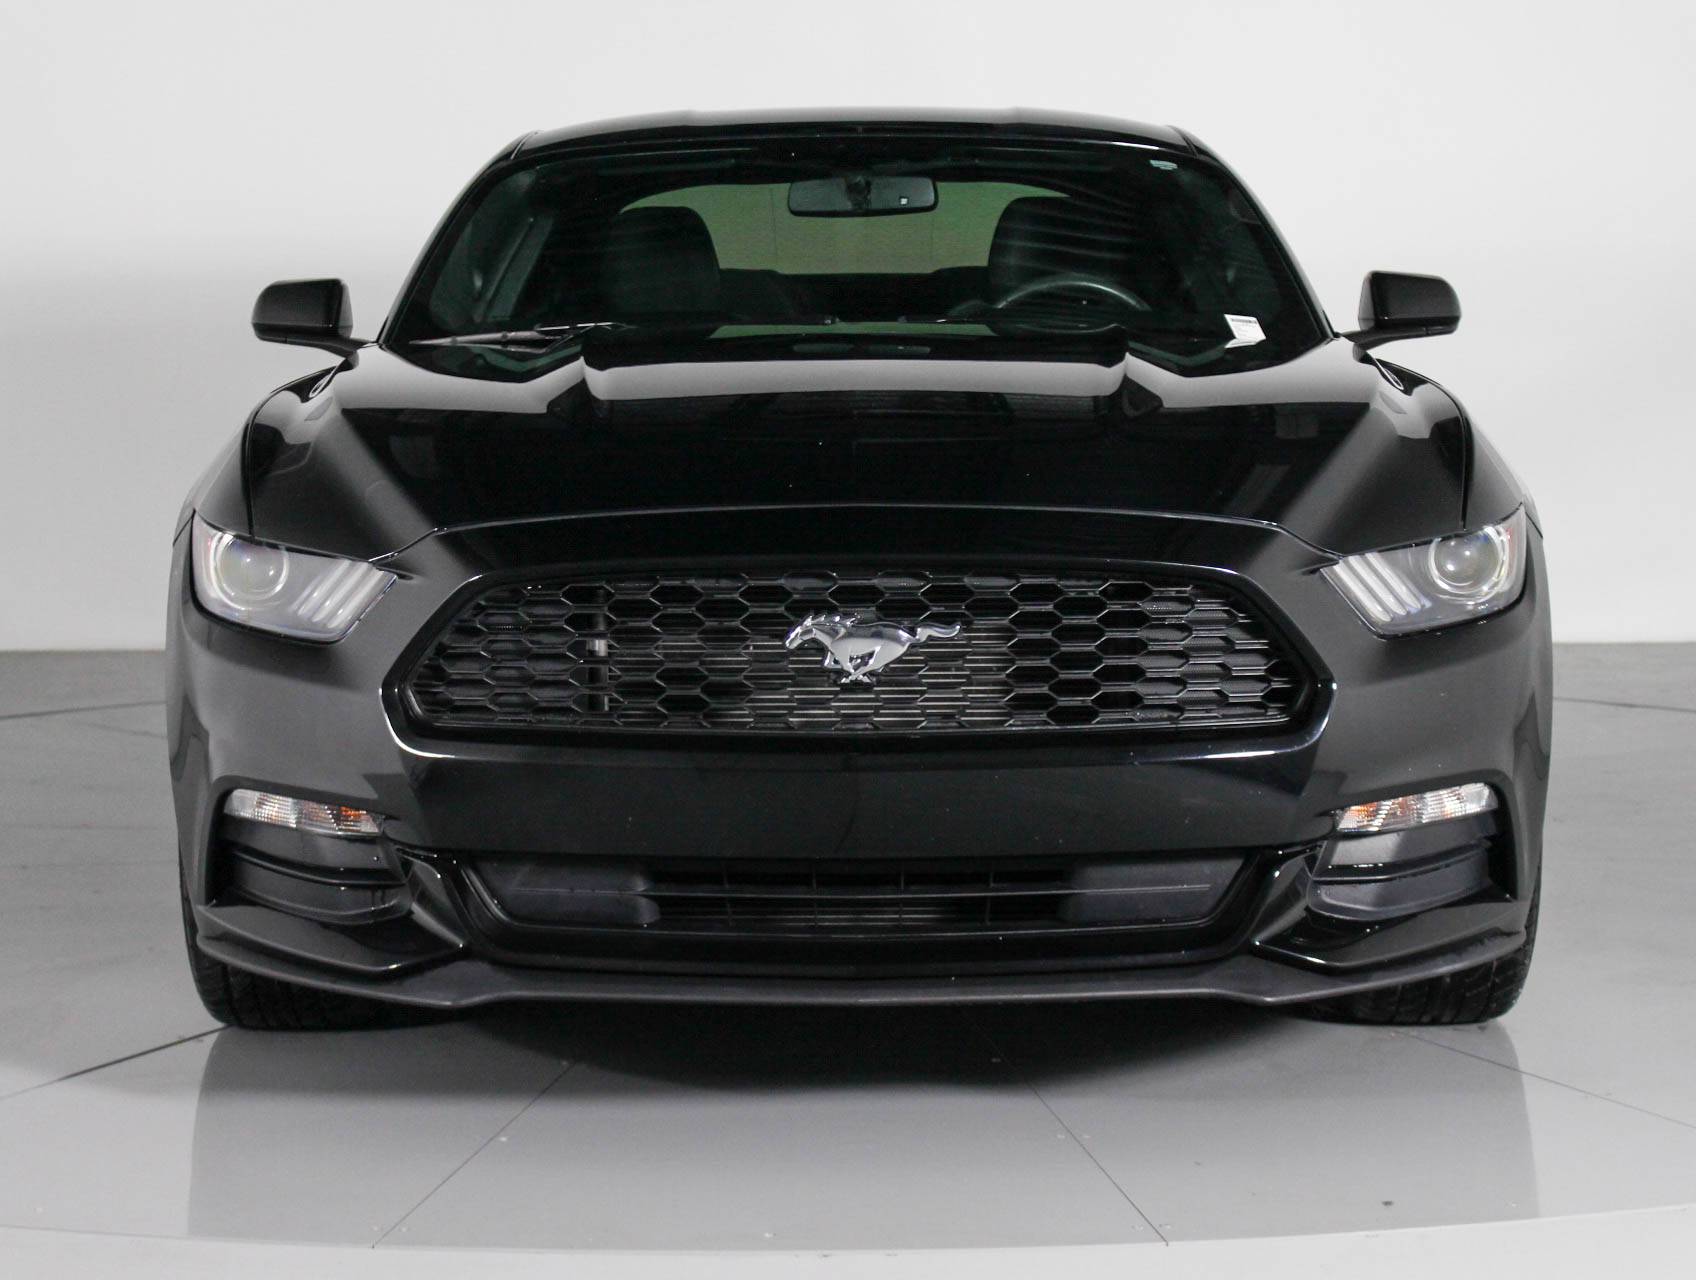 Florida Fine Cars - Used FORD MUSTANG 2016 MARGATE V6